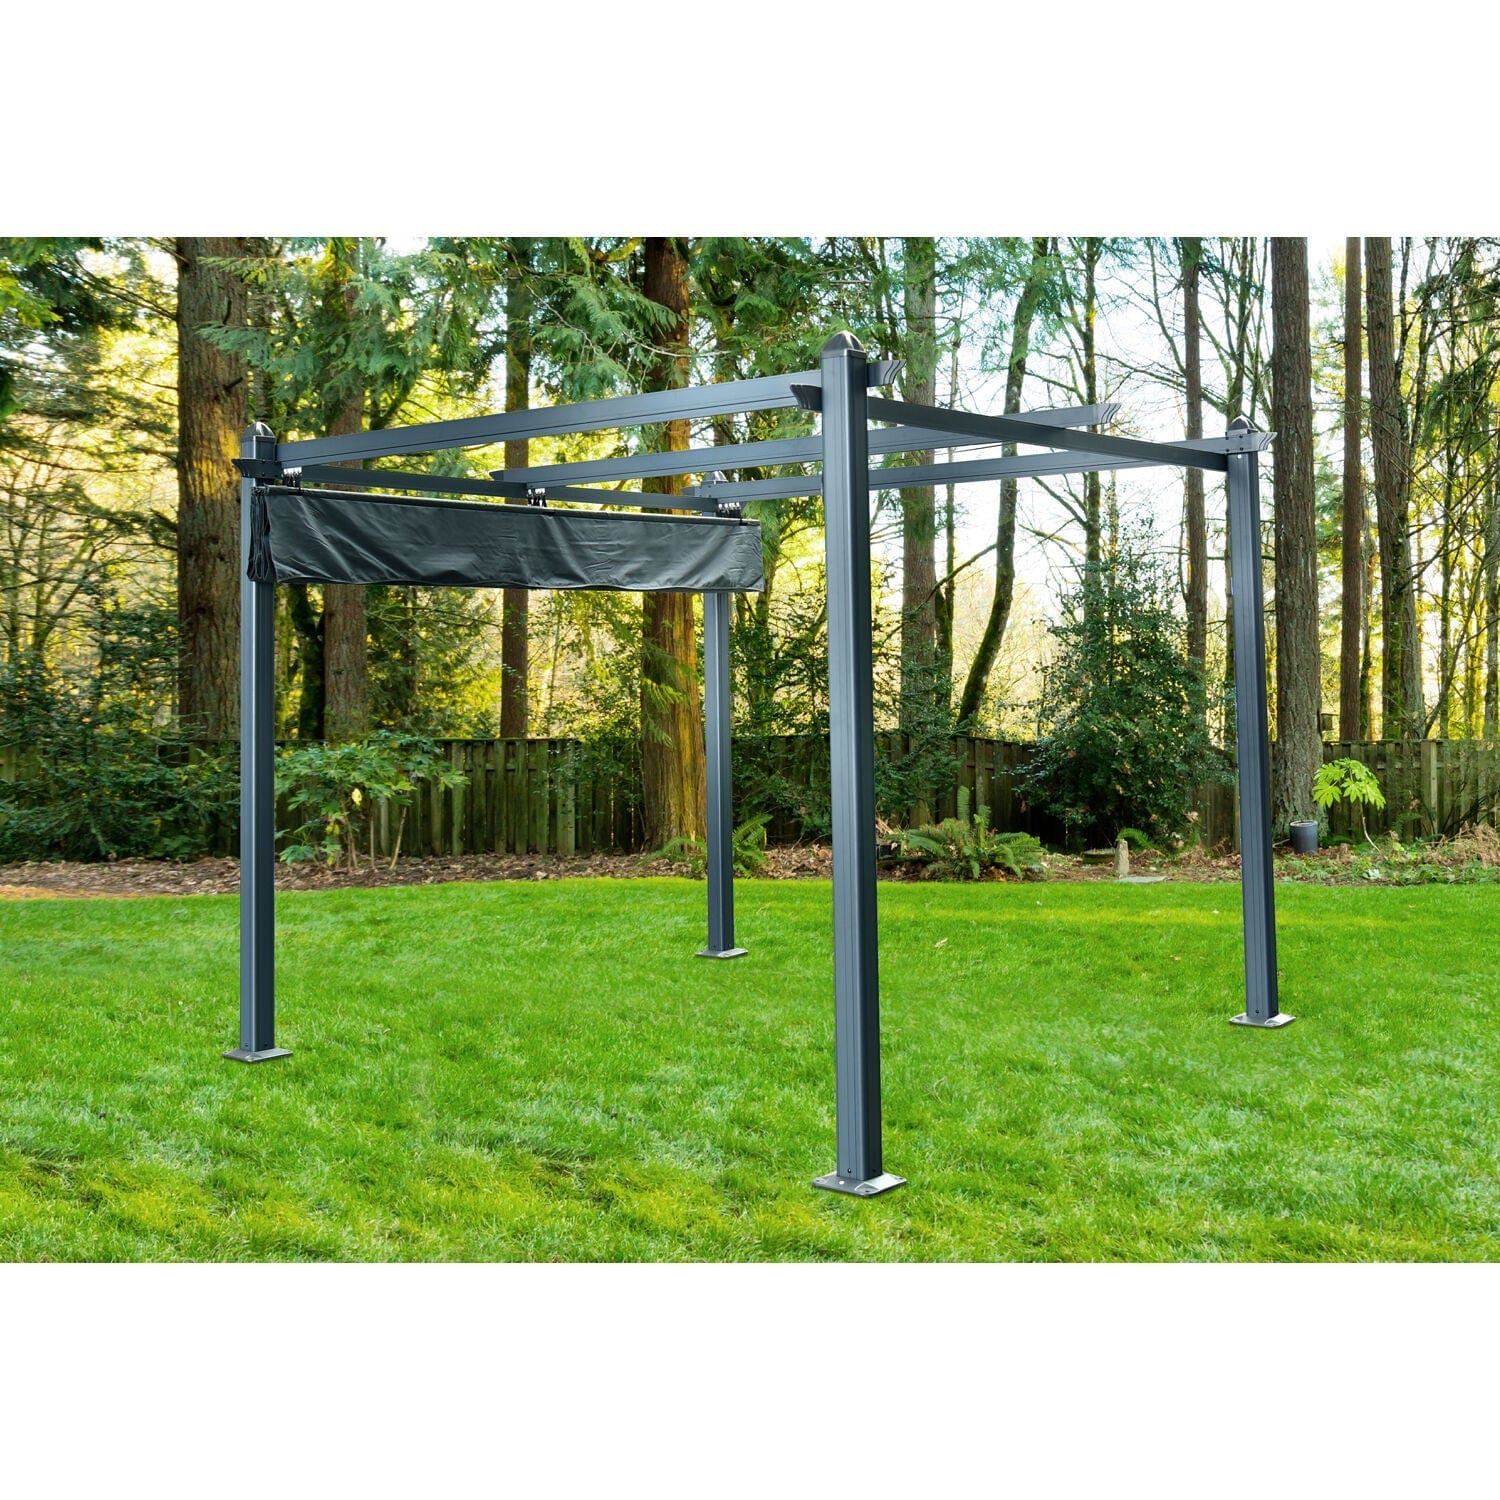 Hanover Aluminum pergola by Hanover 10-Ft. x 10-Ft. | Modern outdoor structure with adjustable canopy cover | HANPERG10X10-GRY